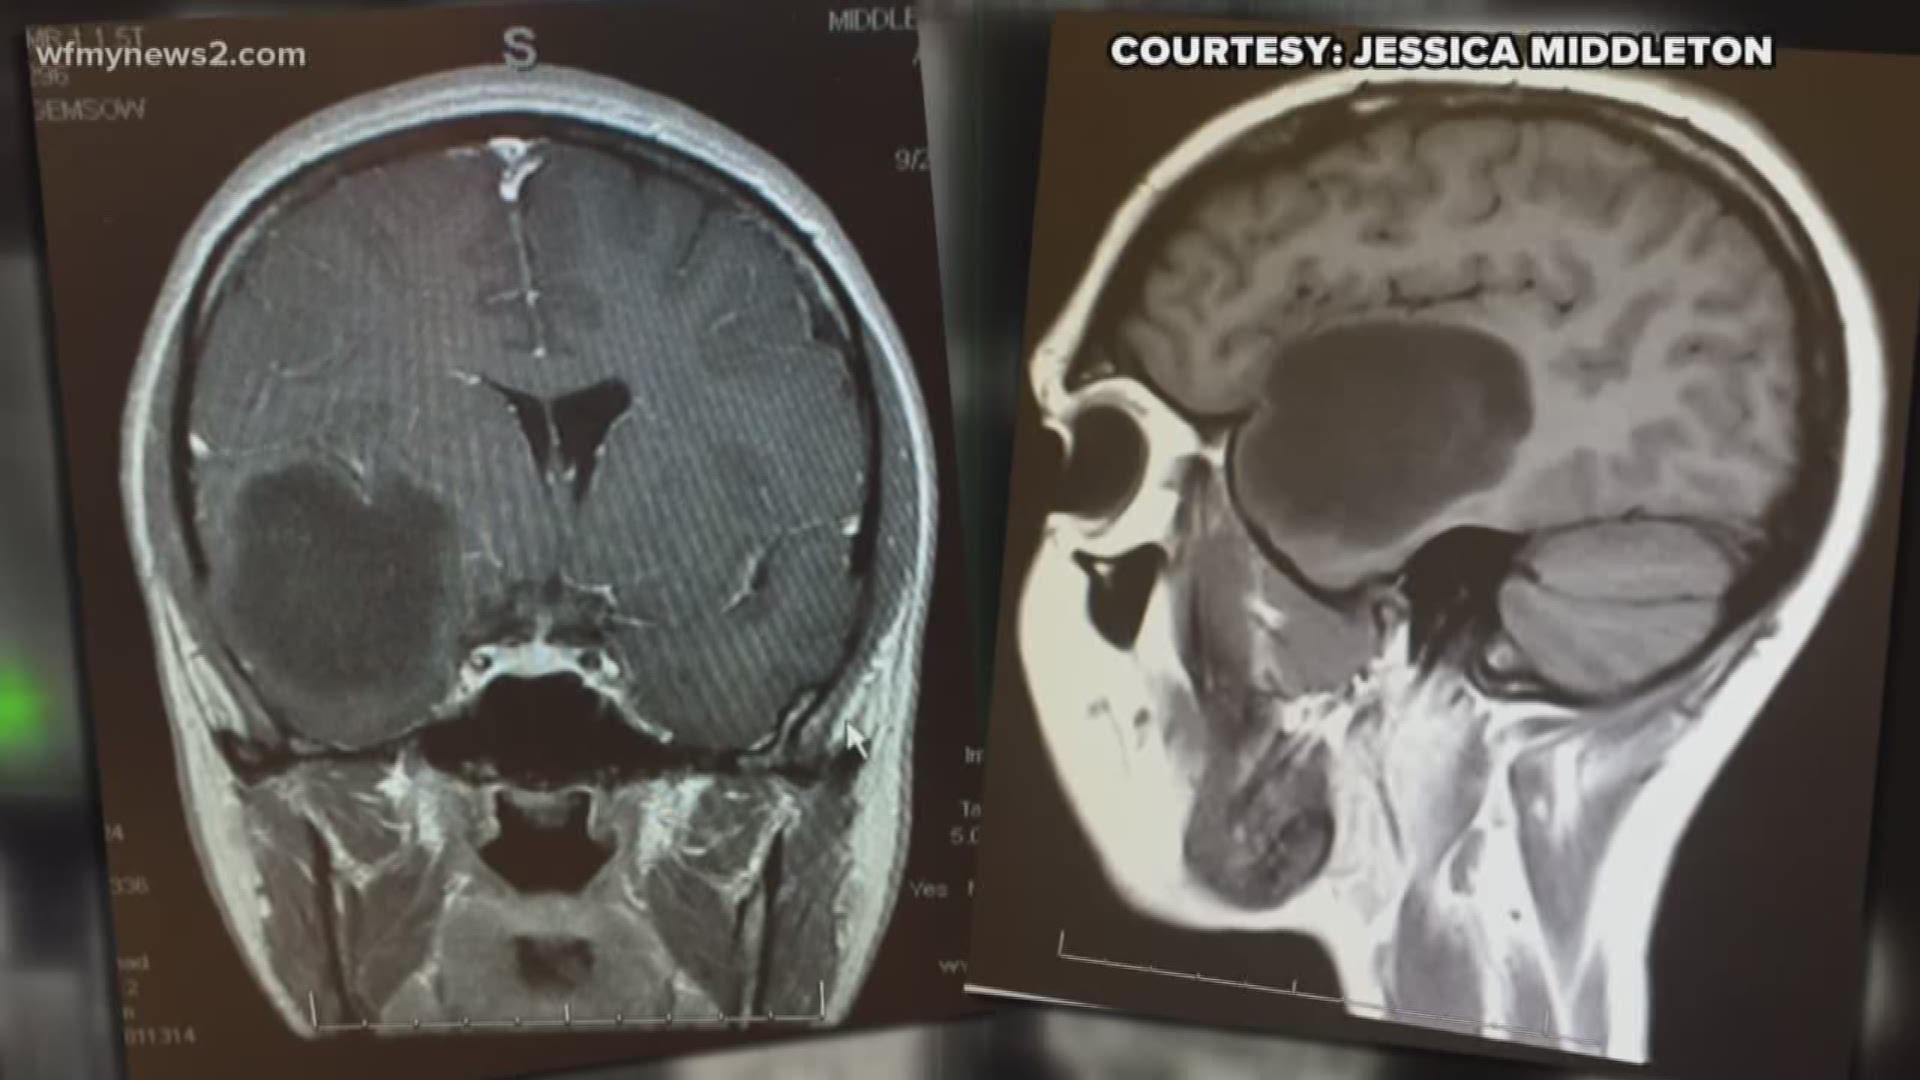 Jessica Middleton was 25 when she was diagnosed with brain cancer. The scan showed a fist-sized tumor in her brain and doctors at Cone Health immediately diagnosed it as an advanced grade stage four cancer.